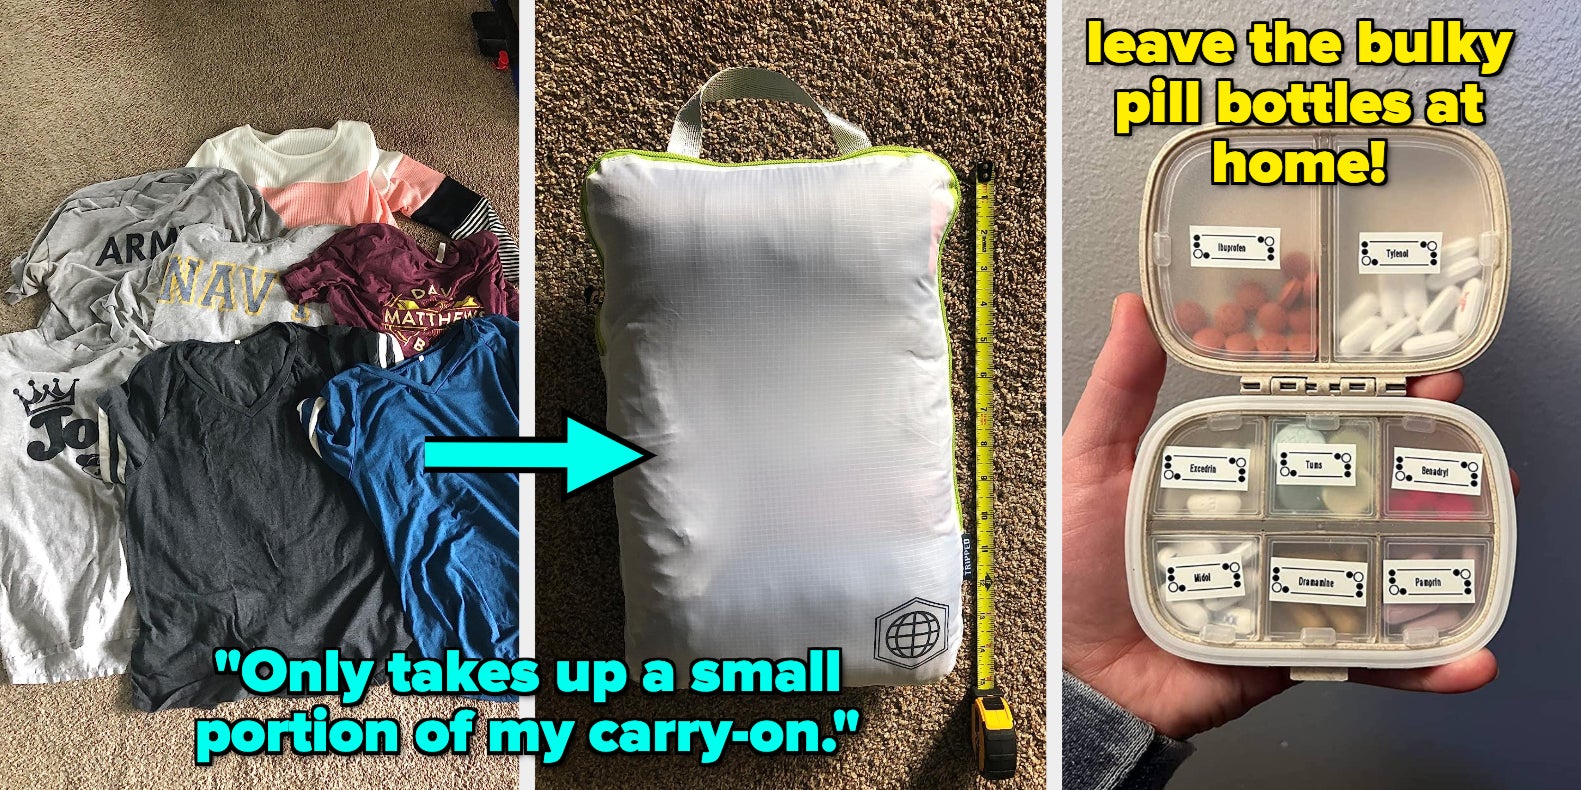 Are Spacesaver Vacuum Bags good for travel? - Daily Mail